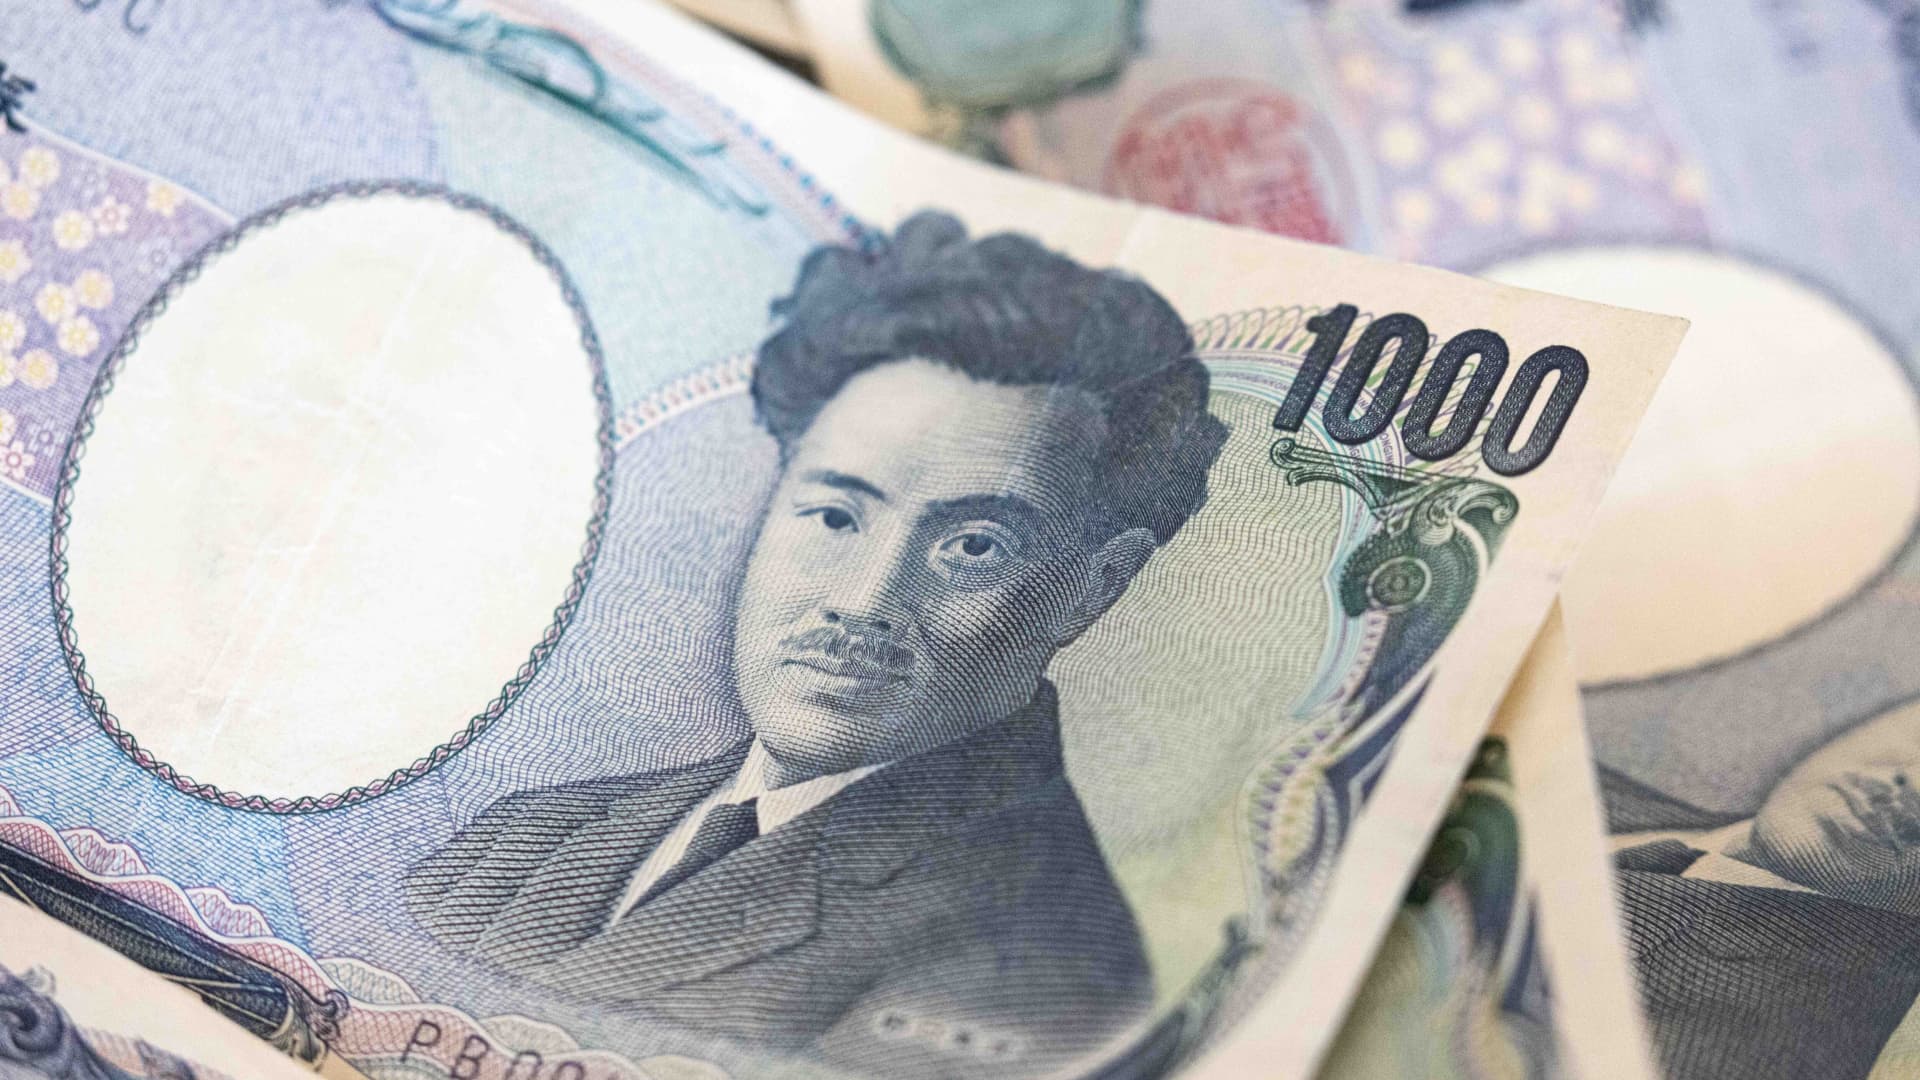 The Japanese yen weakens against the US dollar for the first time since 1990 to 160